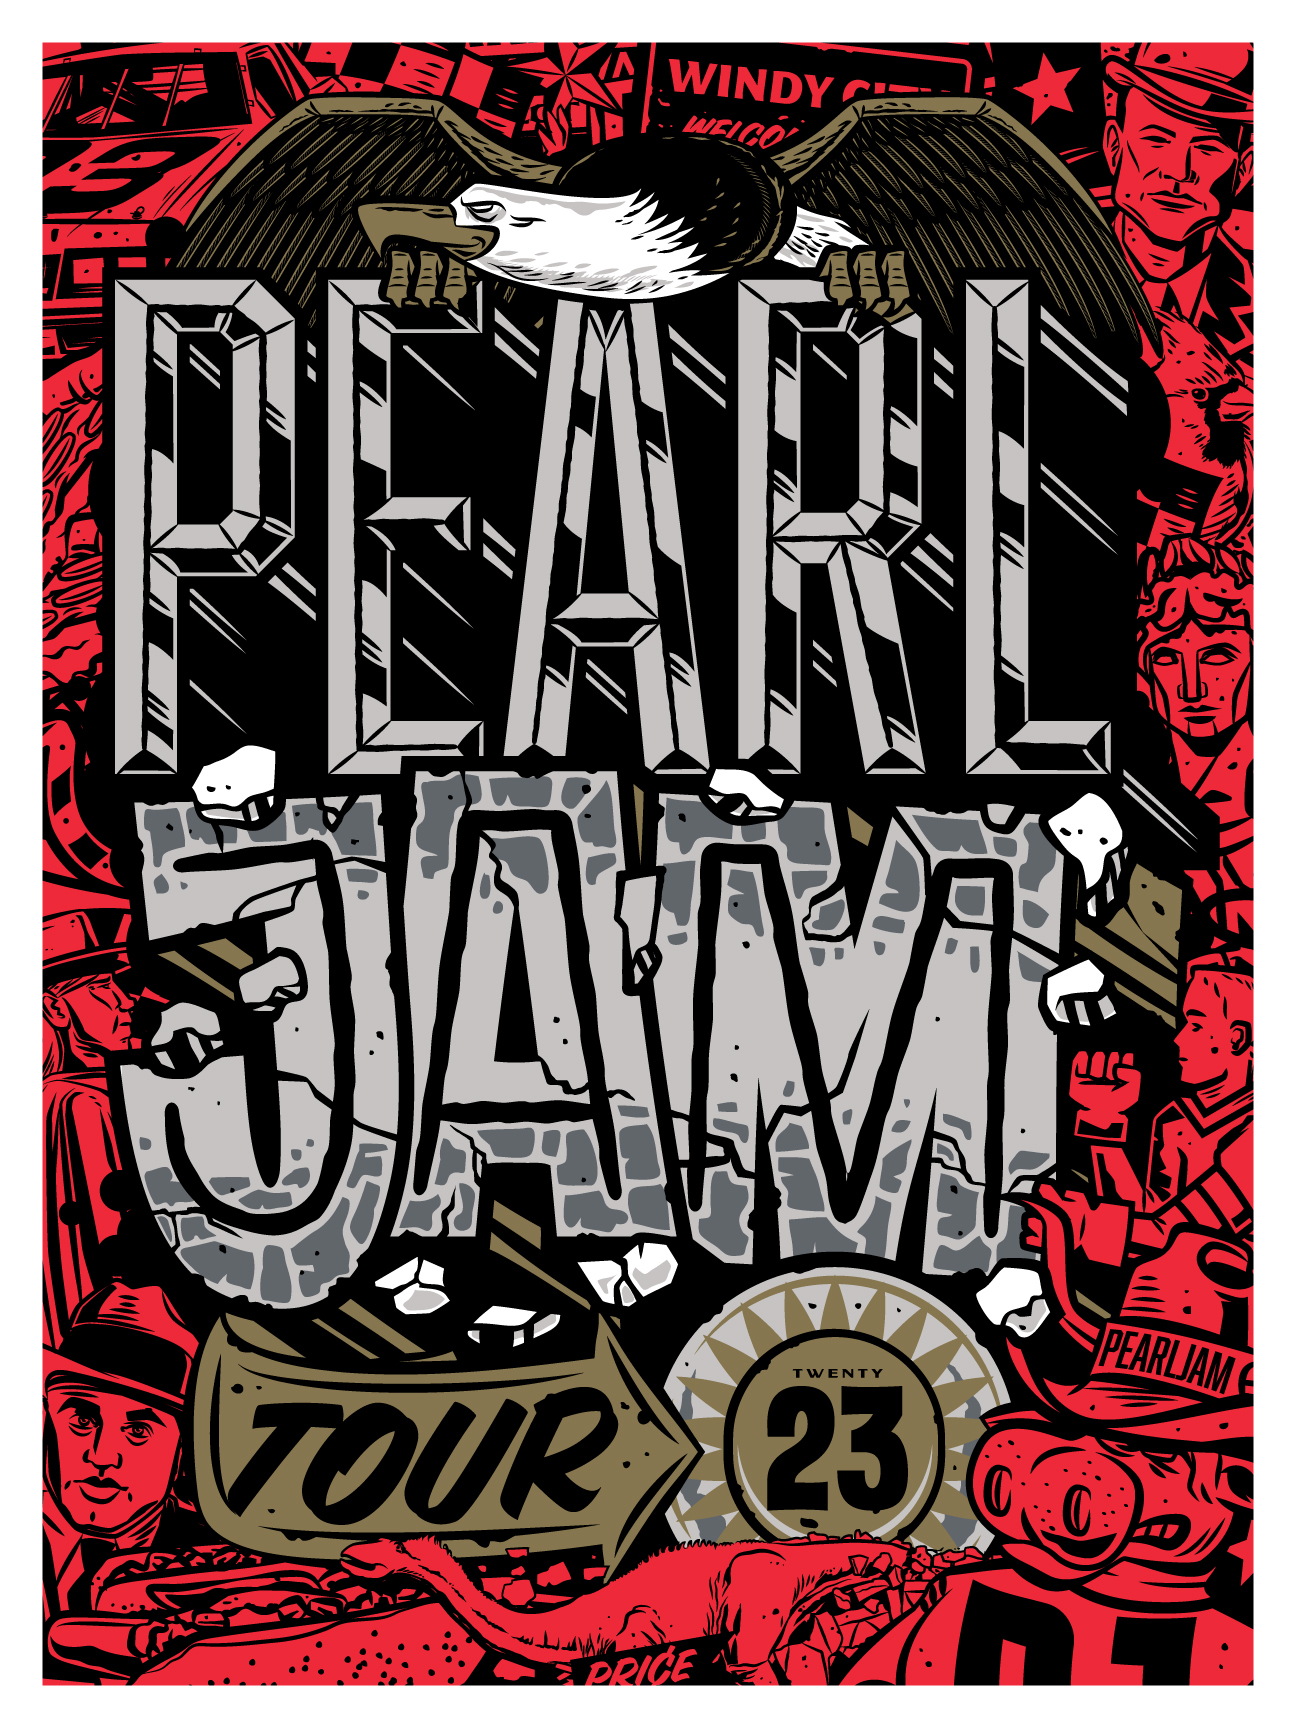 Pearl 🇺🇦 on Twitter: "To kick off the 2023 US tour announcement, Pearl Jam's Club is offering a limited edition poster commemorate the upcoming shows. This item is